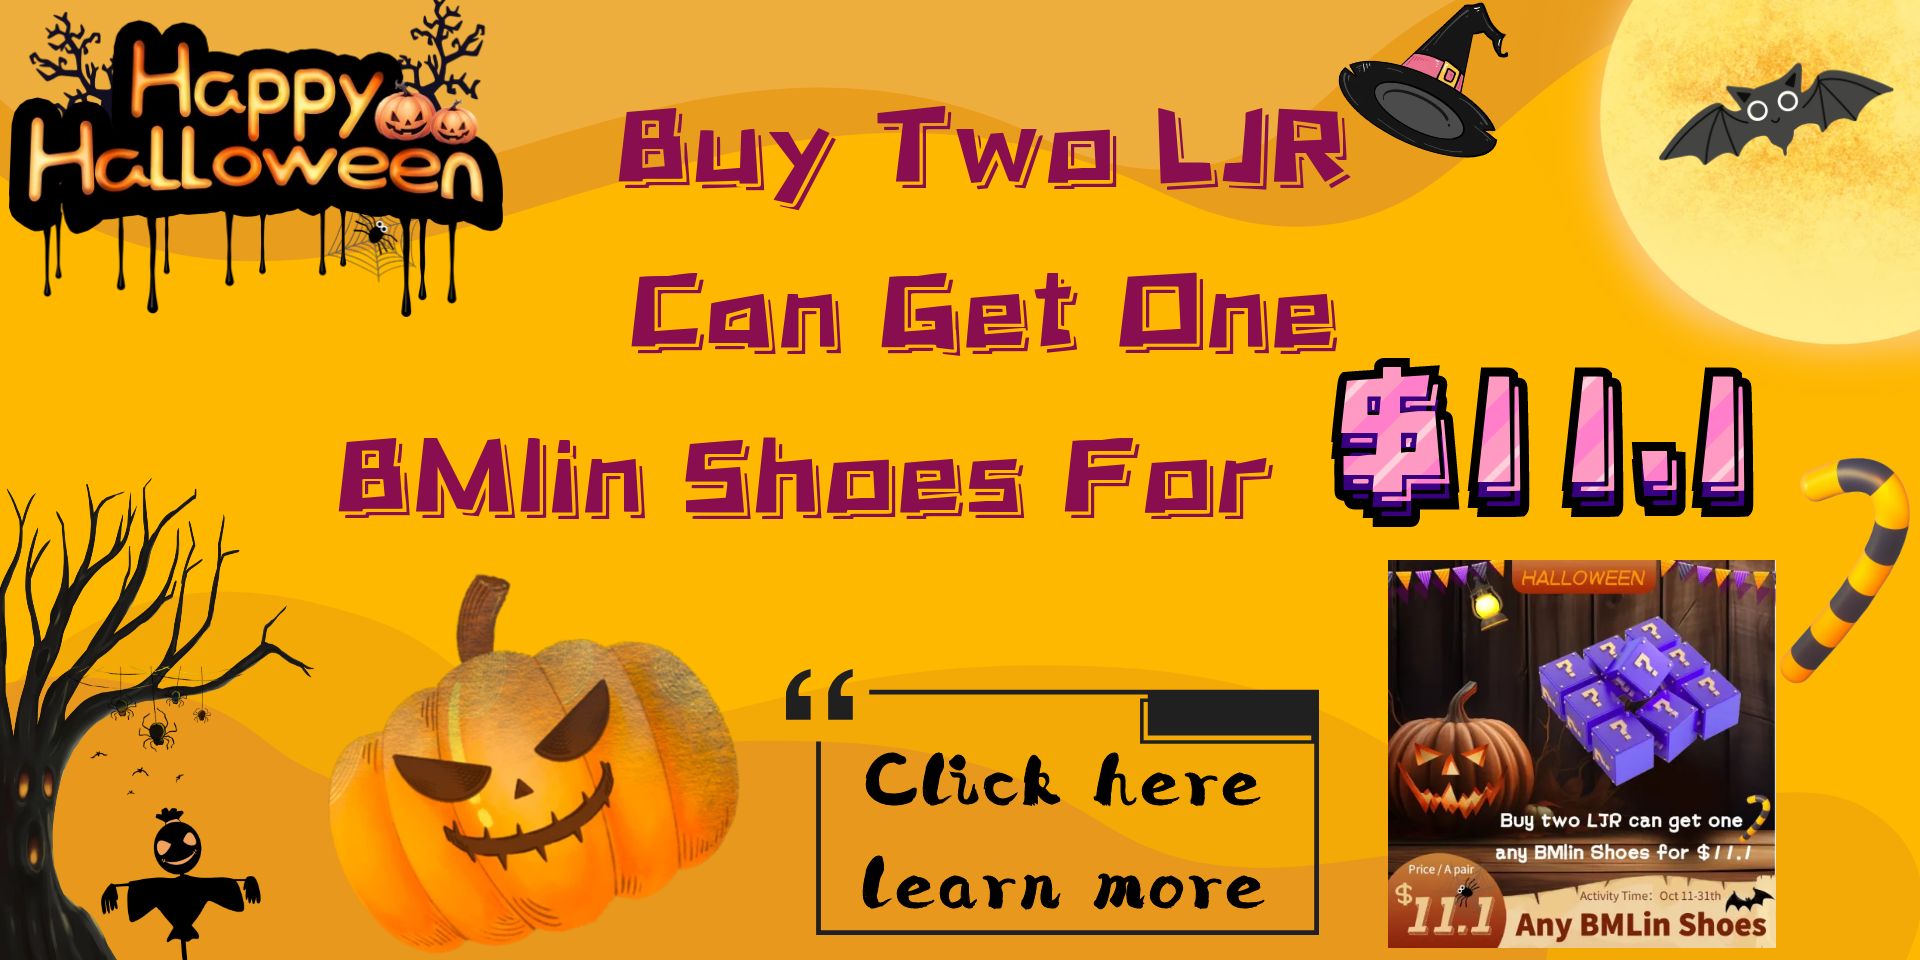 Buy Two LJR Get One BMlin Shoes for 11.1$